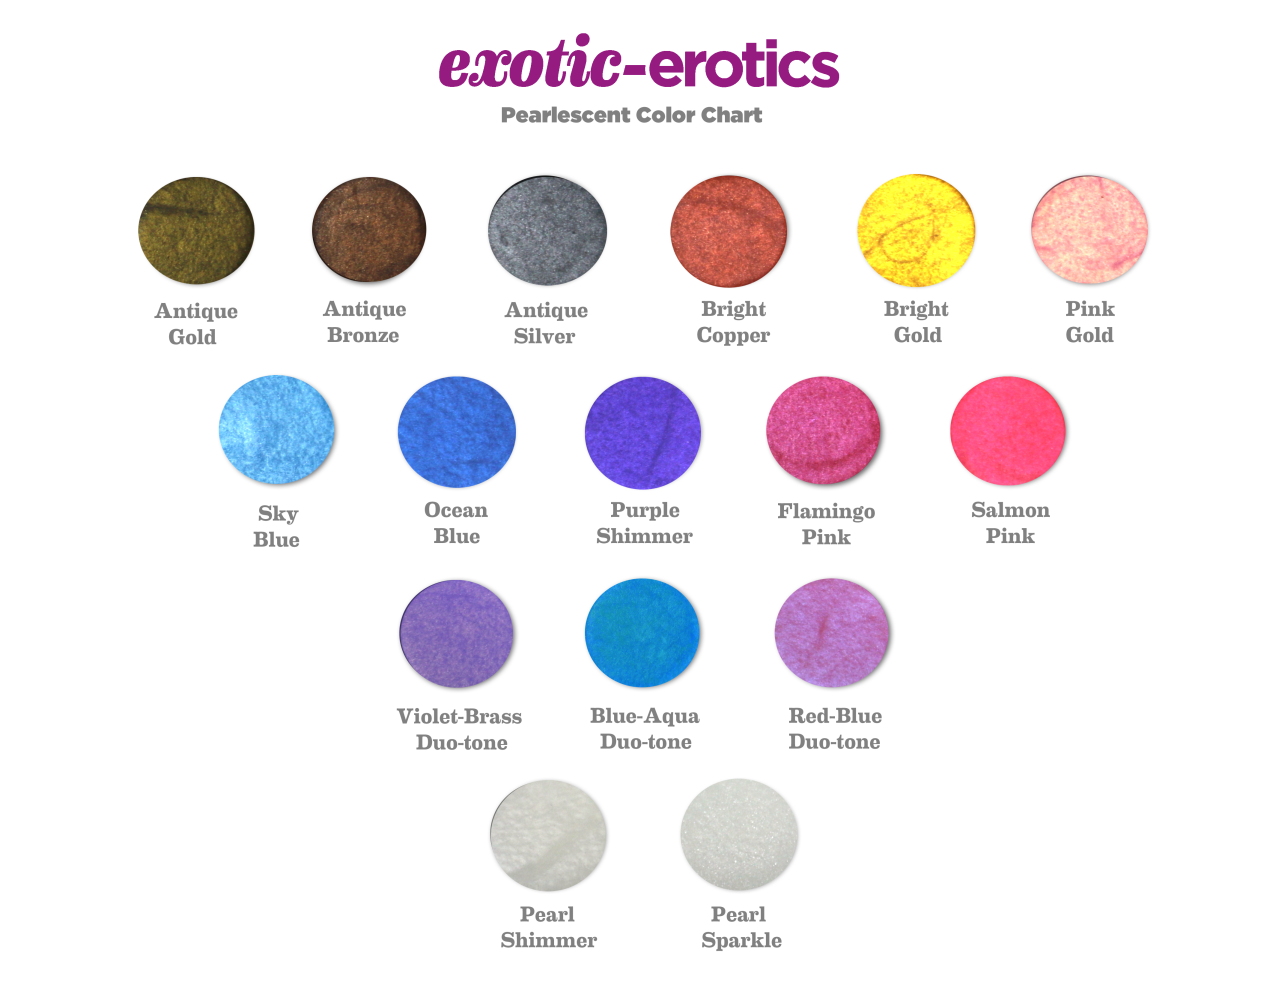 https://exotic-erotics.com/store/images/newsletters/Pearlescent.png